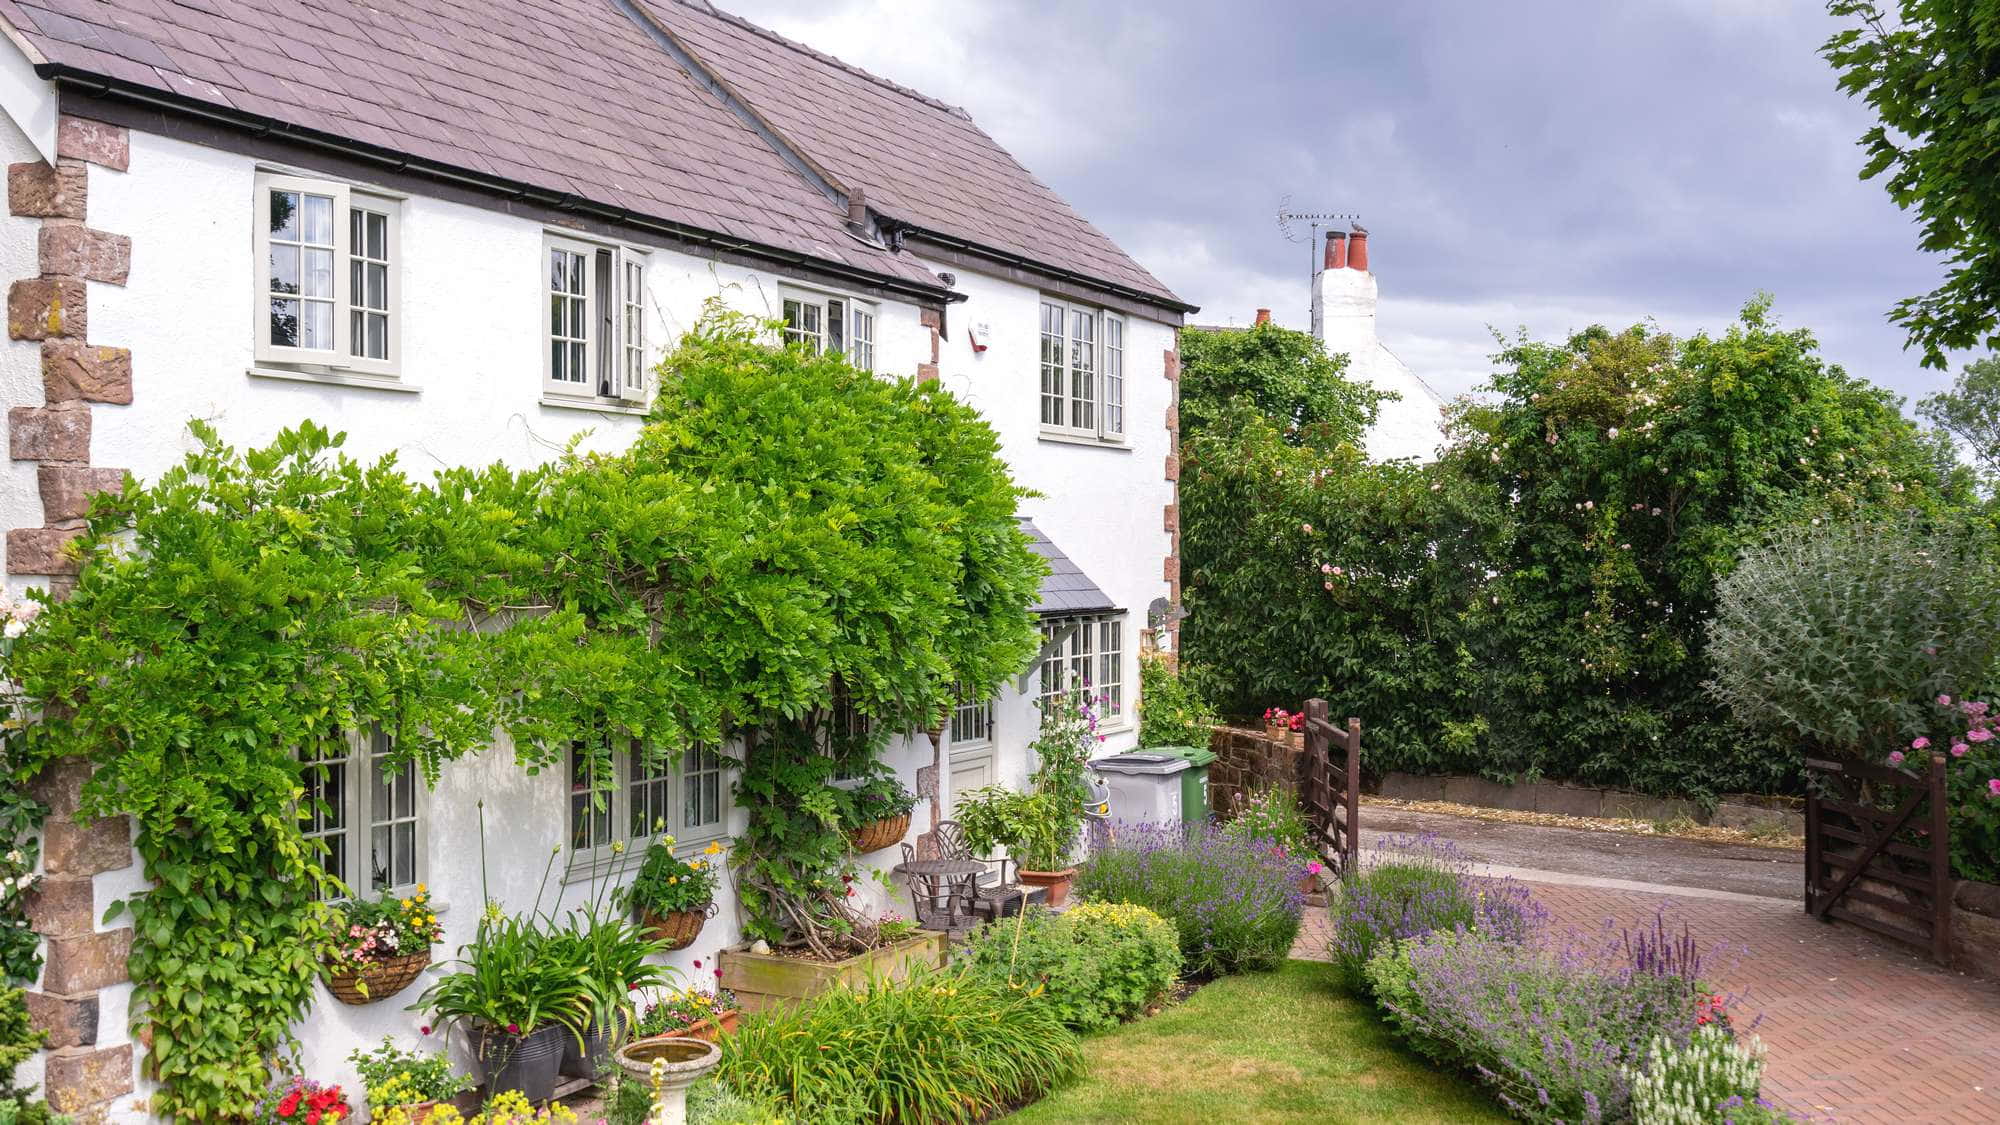 Traditional cottage with large wisteria and beautiful cottage garden.